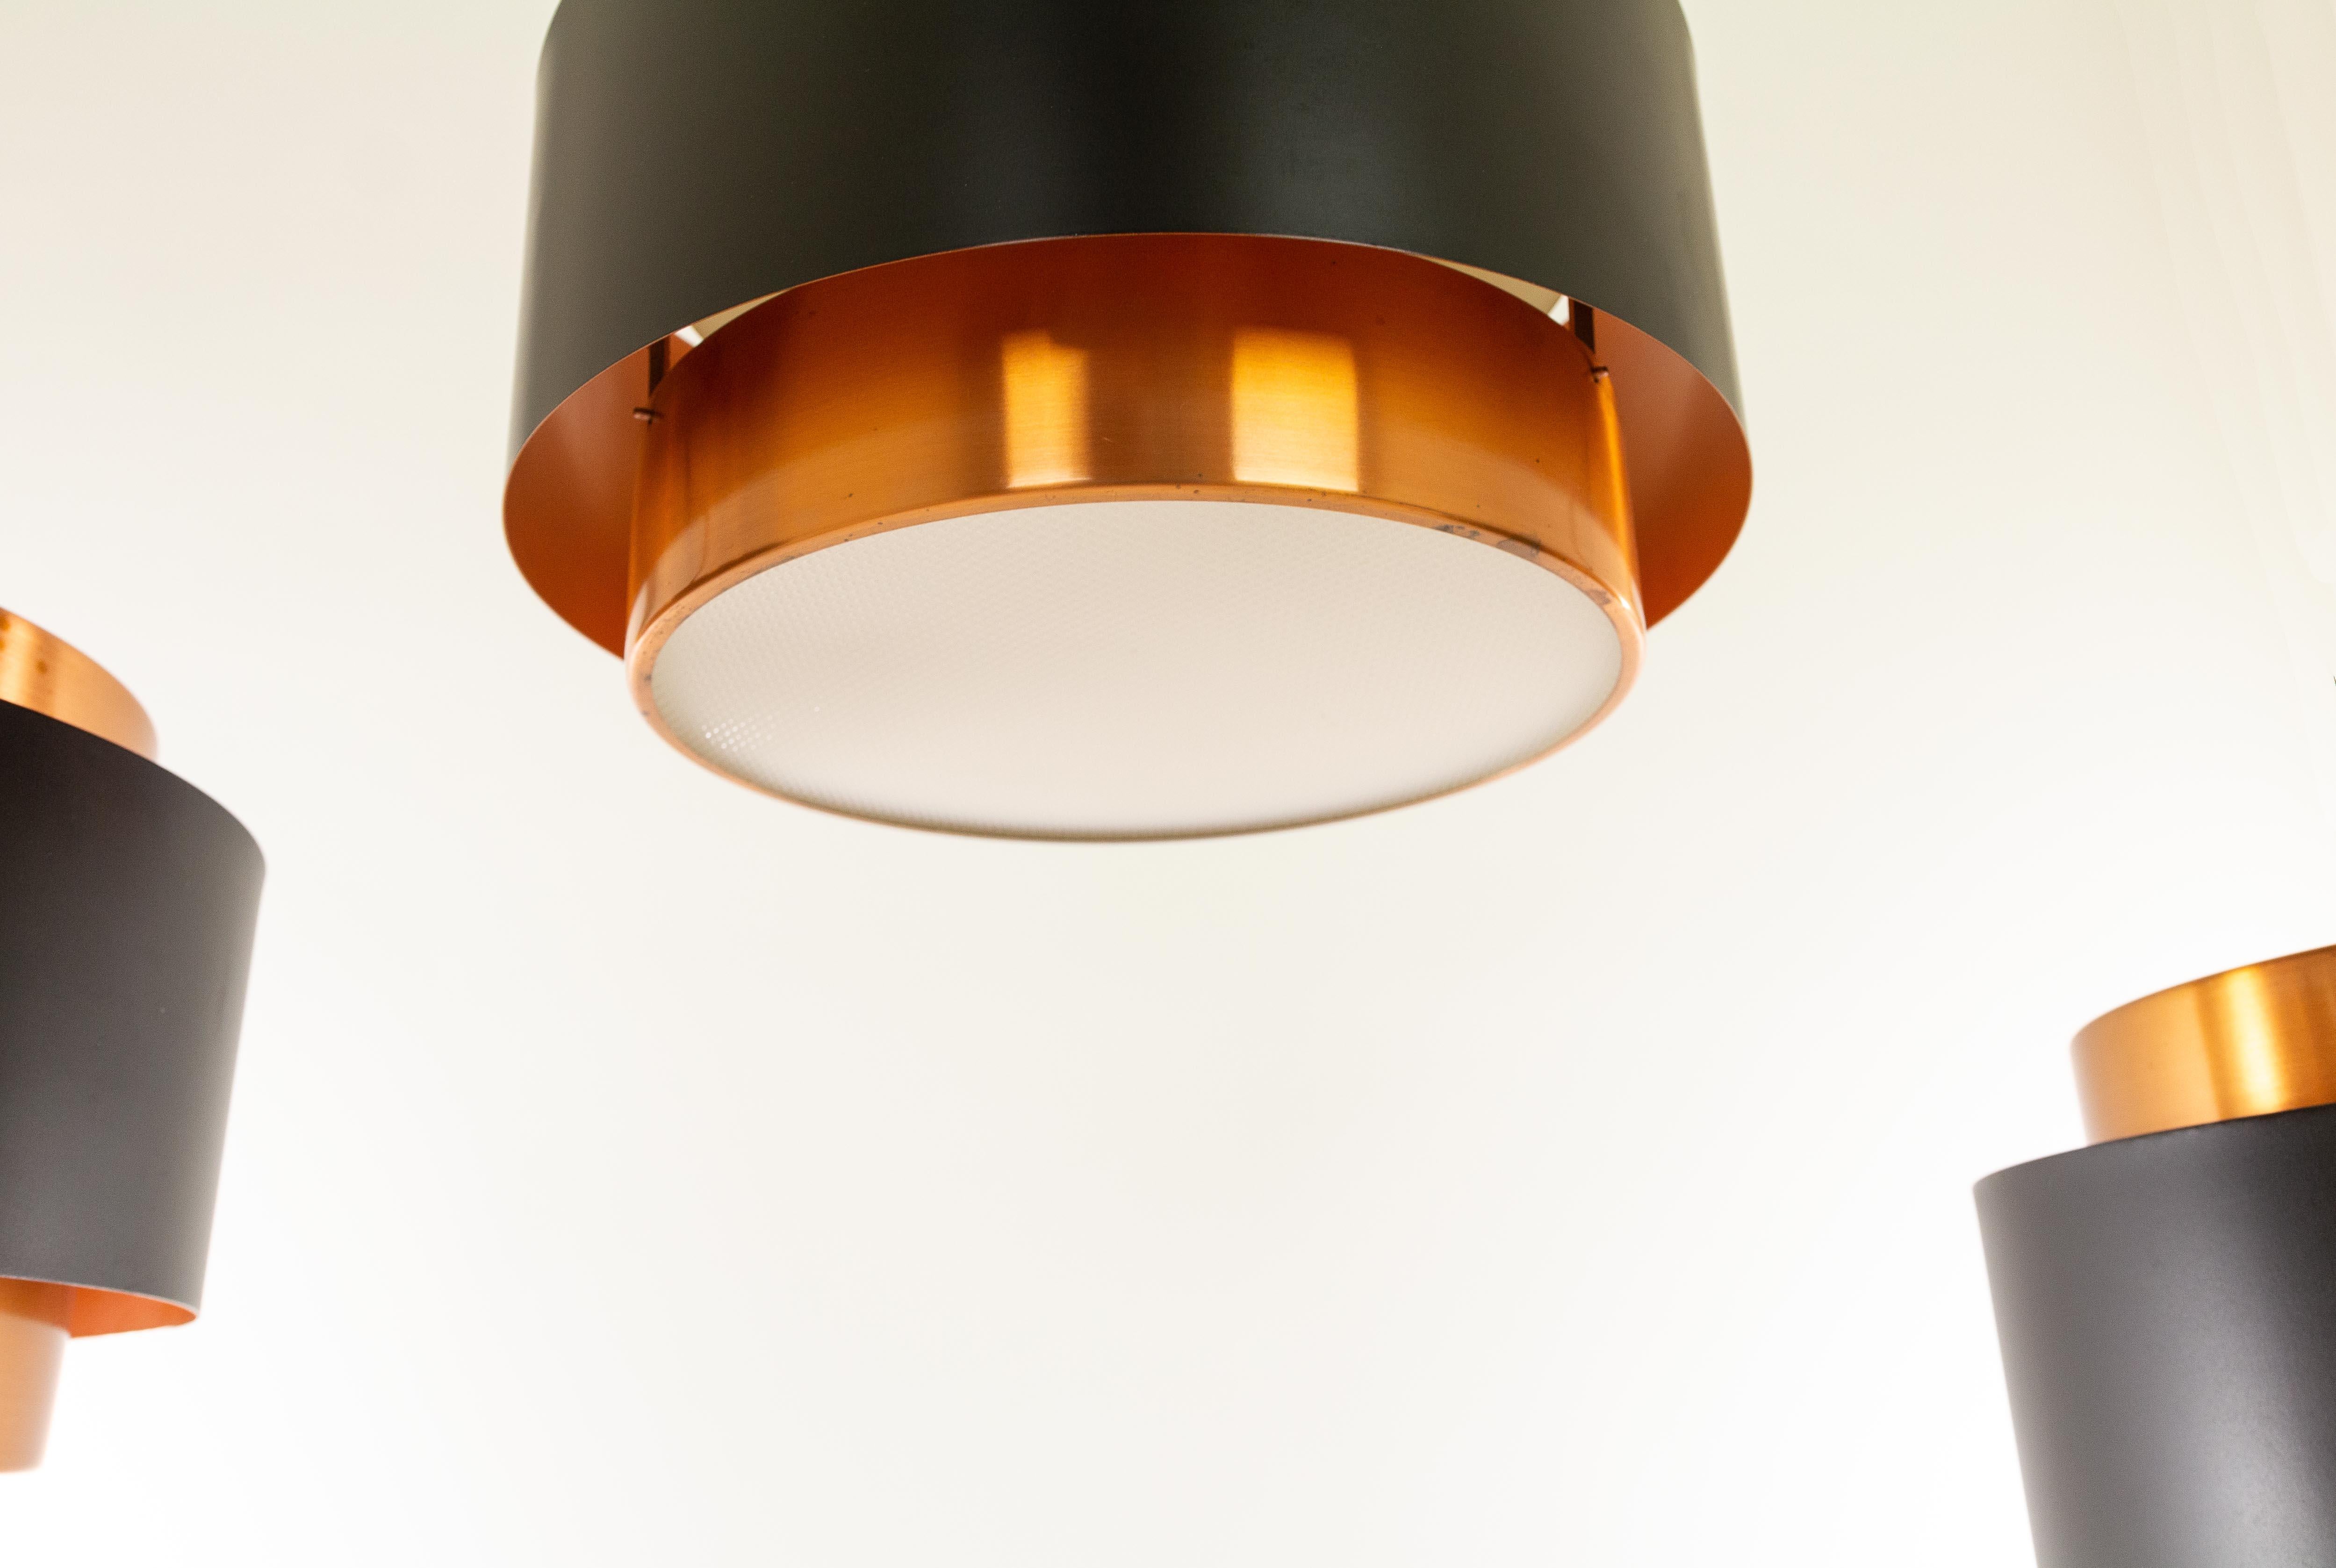 Unique set of three Saturn pendants, designed by Danish designer Jo Hammerborg and manufactured by Fog & Mørup.

The lamp is a structure of two concentric cylindrical copper bands that are held together by a black lacquered band. At the top and